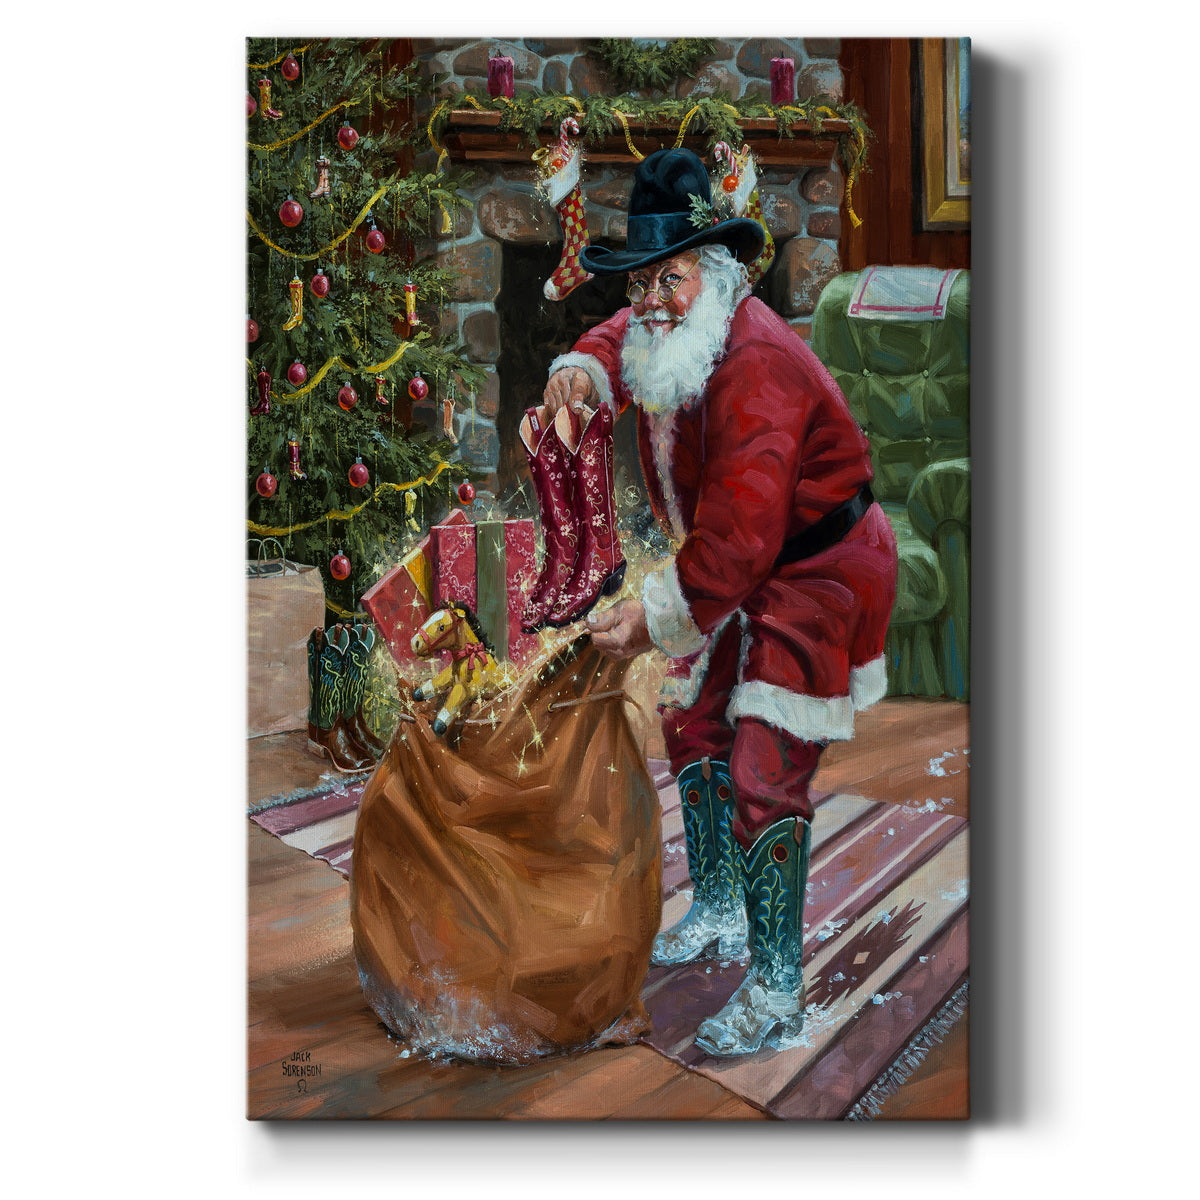 New Boots for Christmas - Gallery Wrapped Canvas